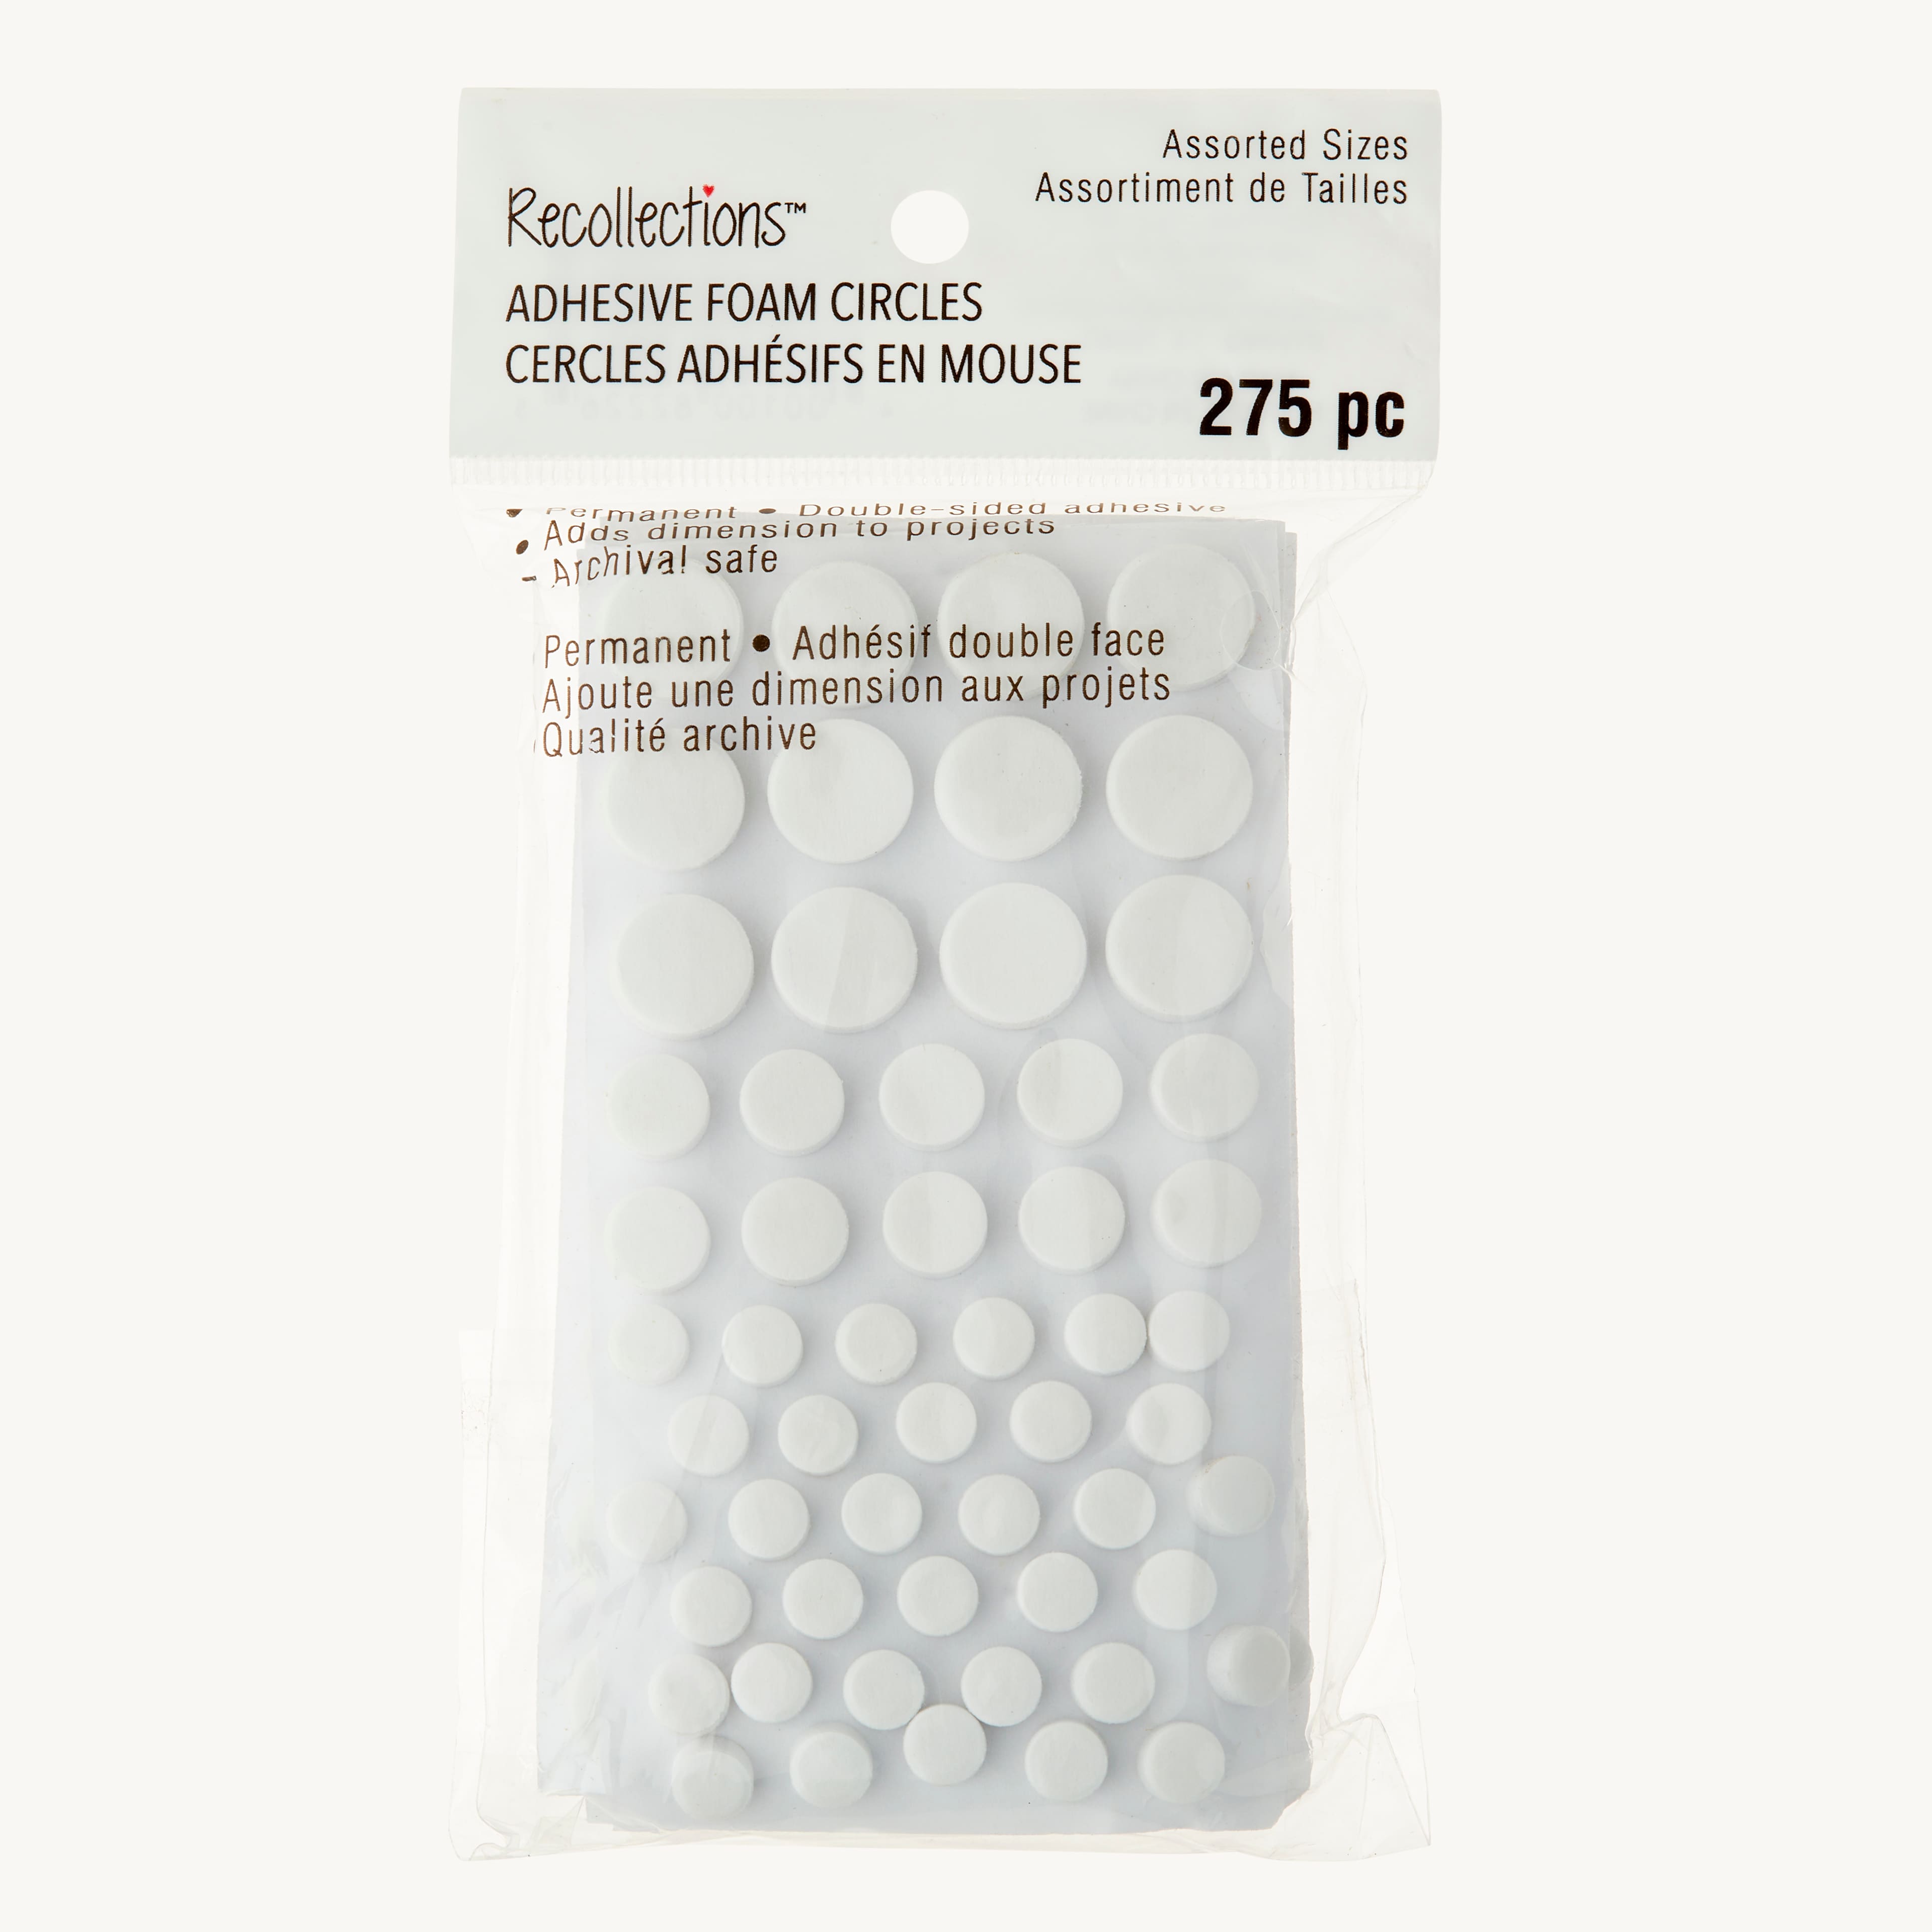 Recollections Assorted Foam Adhesive Circles - 275 ct